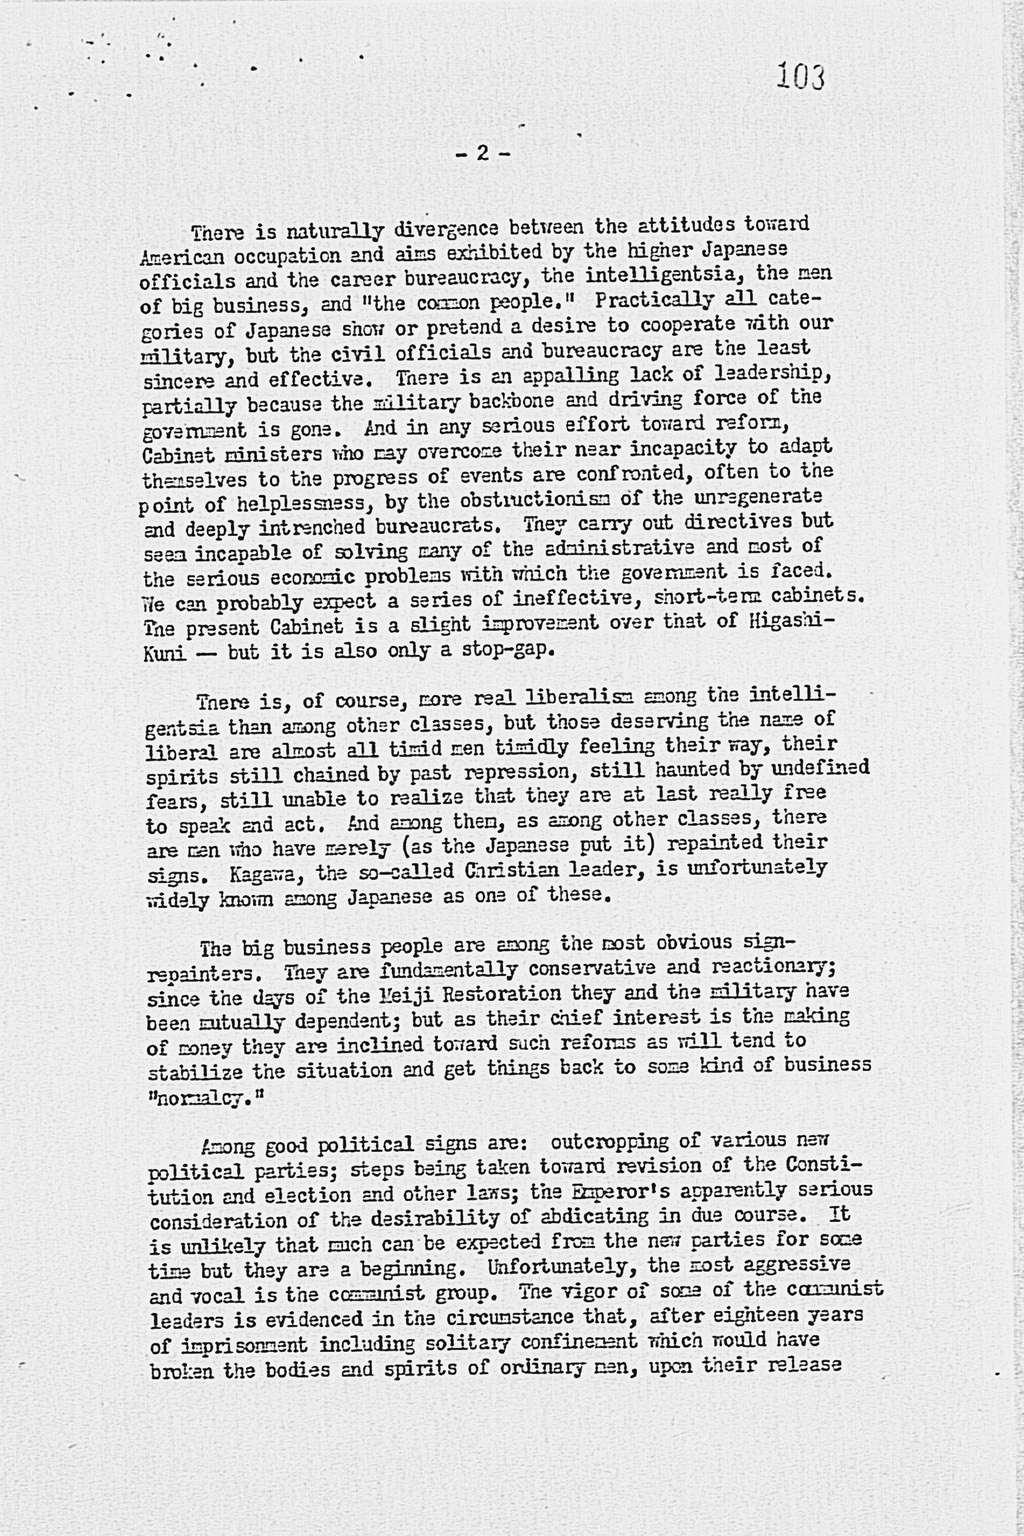 [Letter from George Atcheson, Jr. to the President dated November 5, 1945.](Larger image)